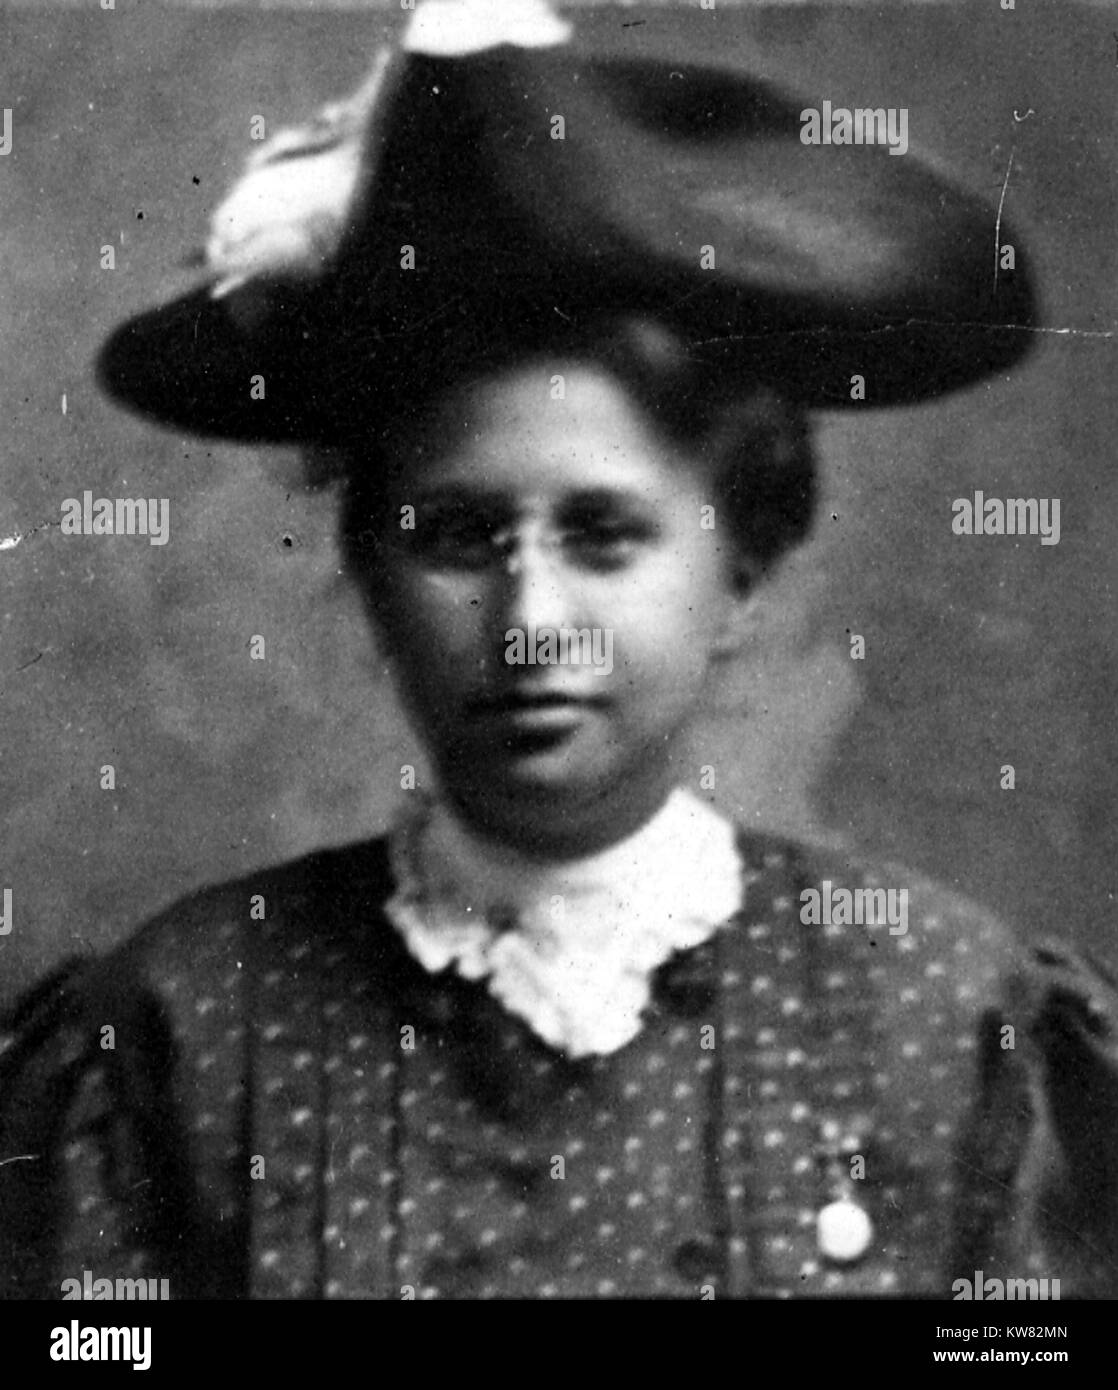 Shoulders up portrait of Bess Wallace, who became the first lady to President Harry S Truman, wearing a large hat, 1900. Image courtesy National Archives. Stock Photo